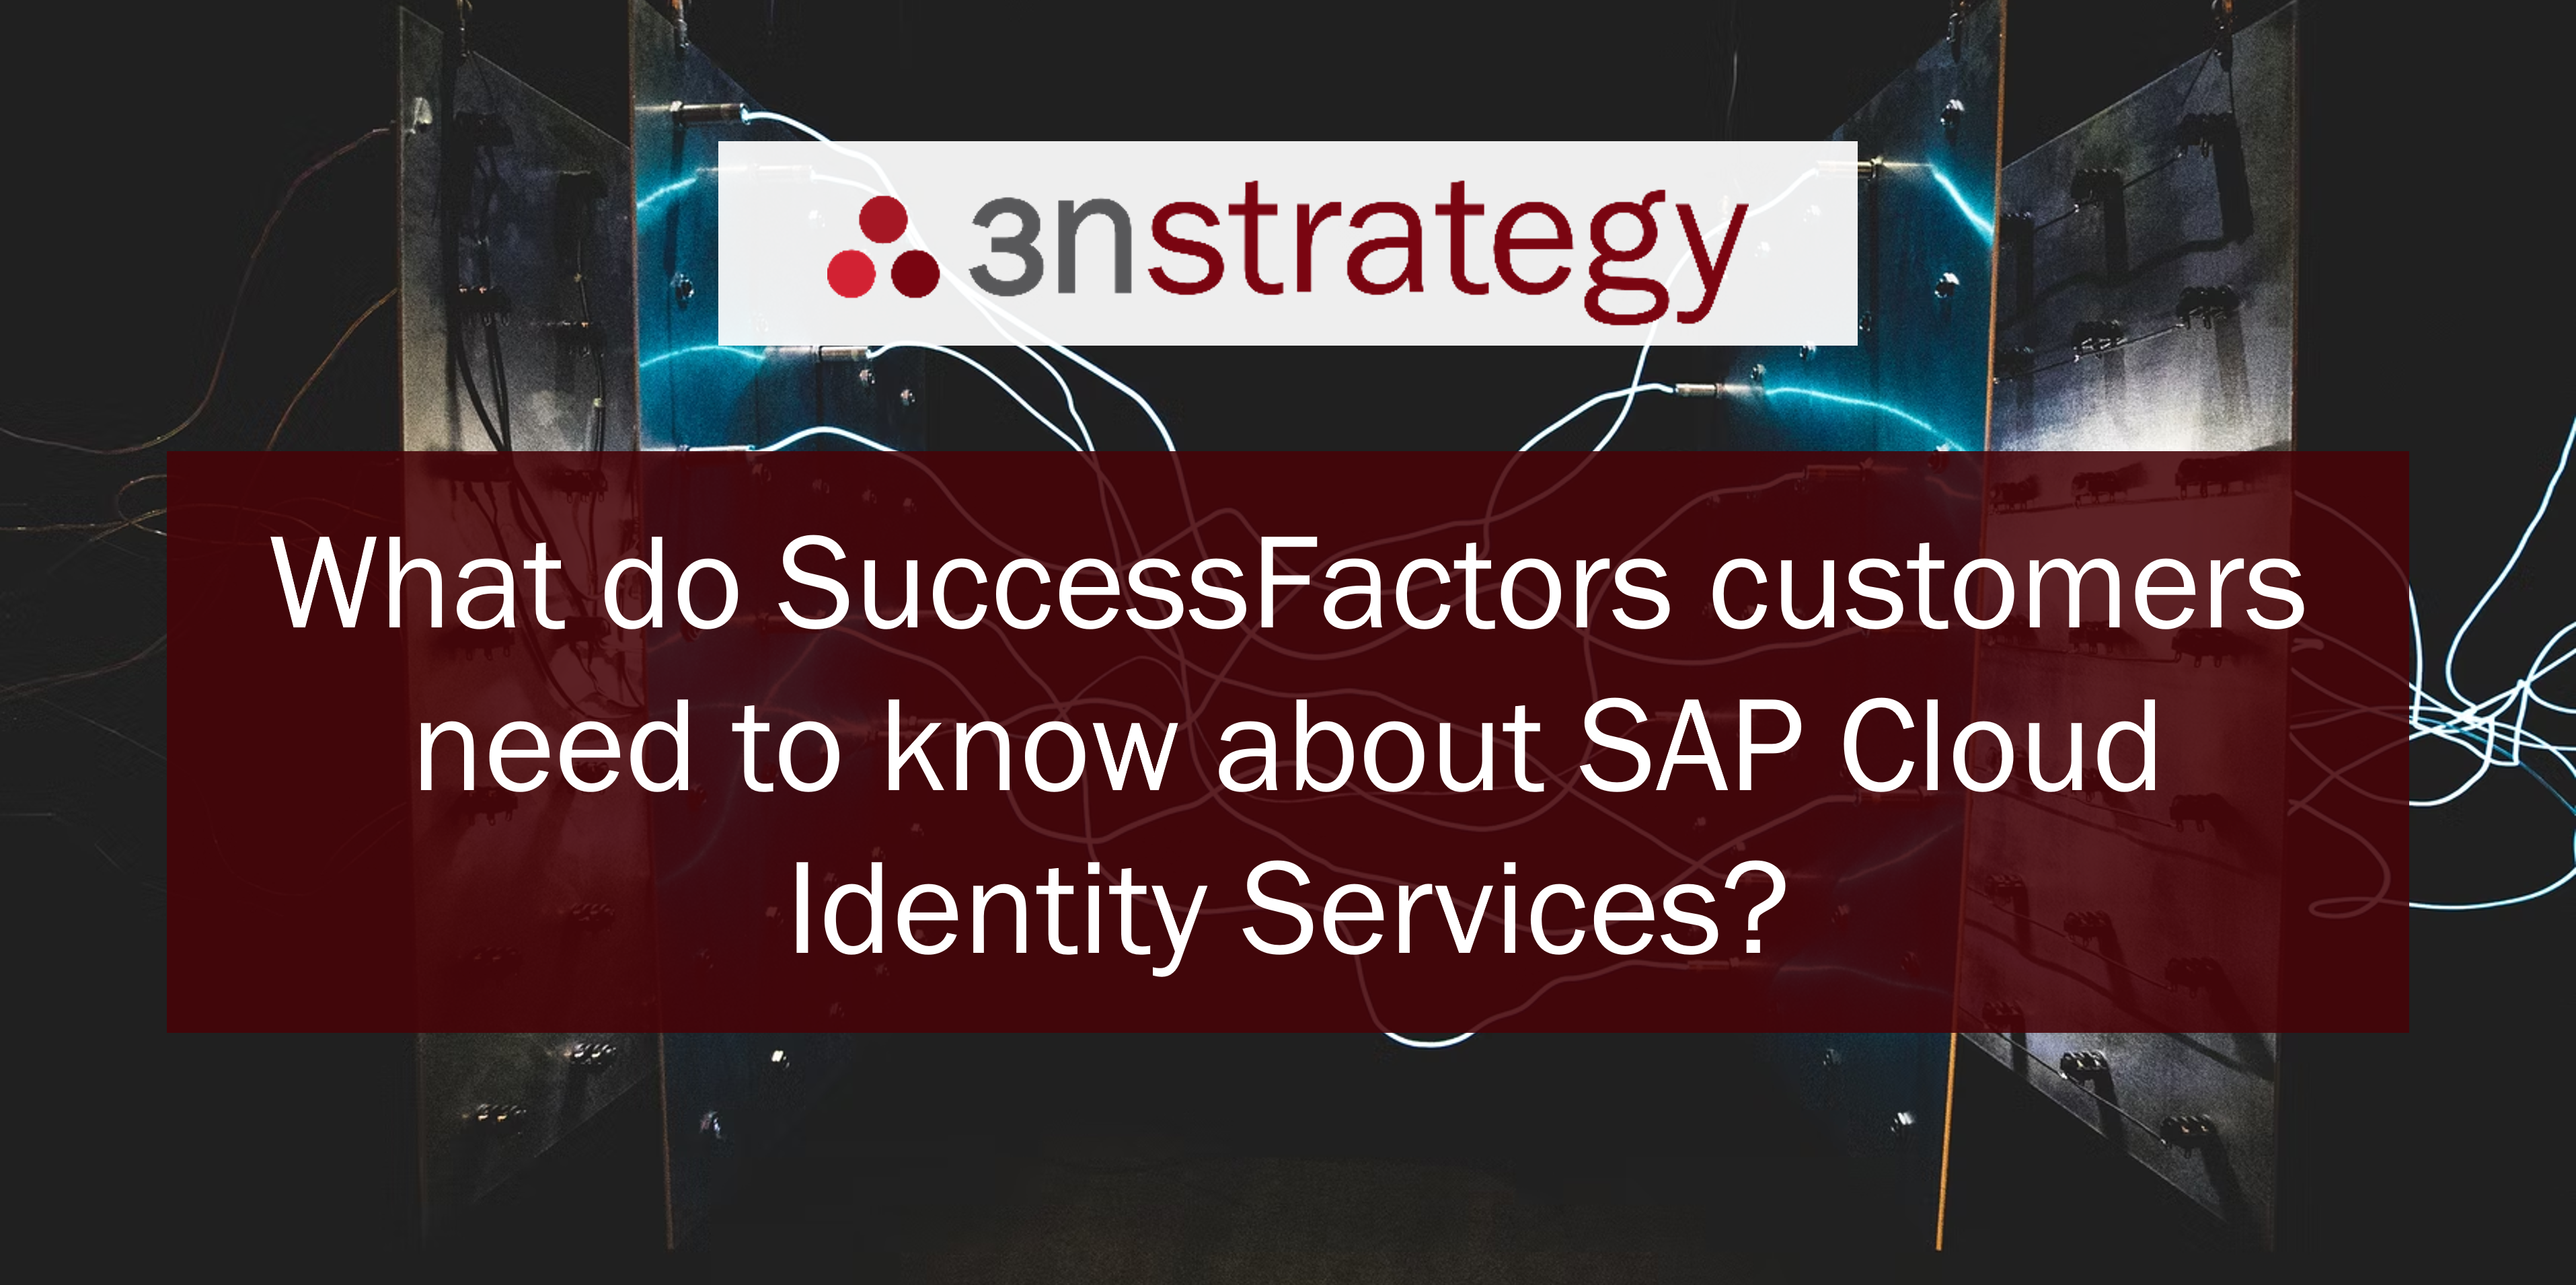 What do SuccessFactors customers need to know about SAP Cloud Identity Services IAS